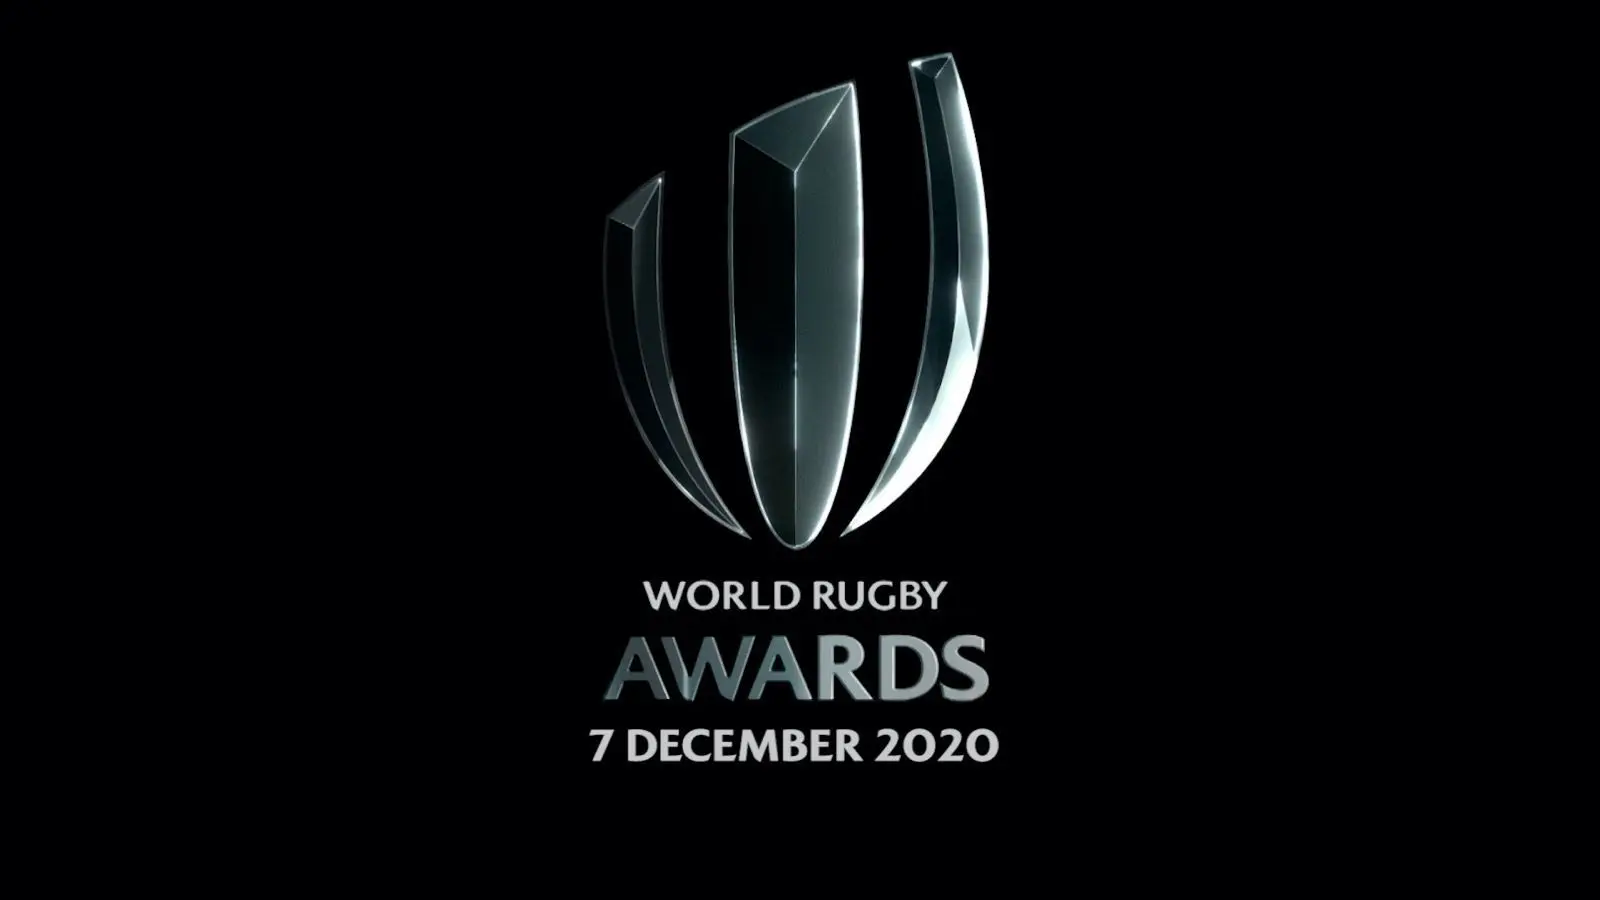 World rugby awards special edition 7 december 2020